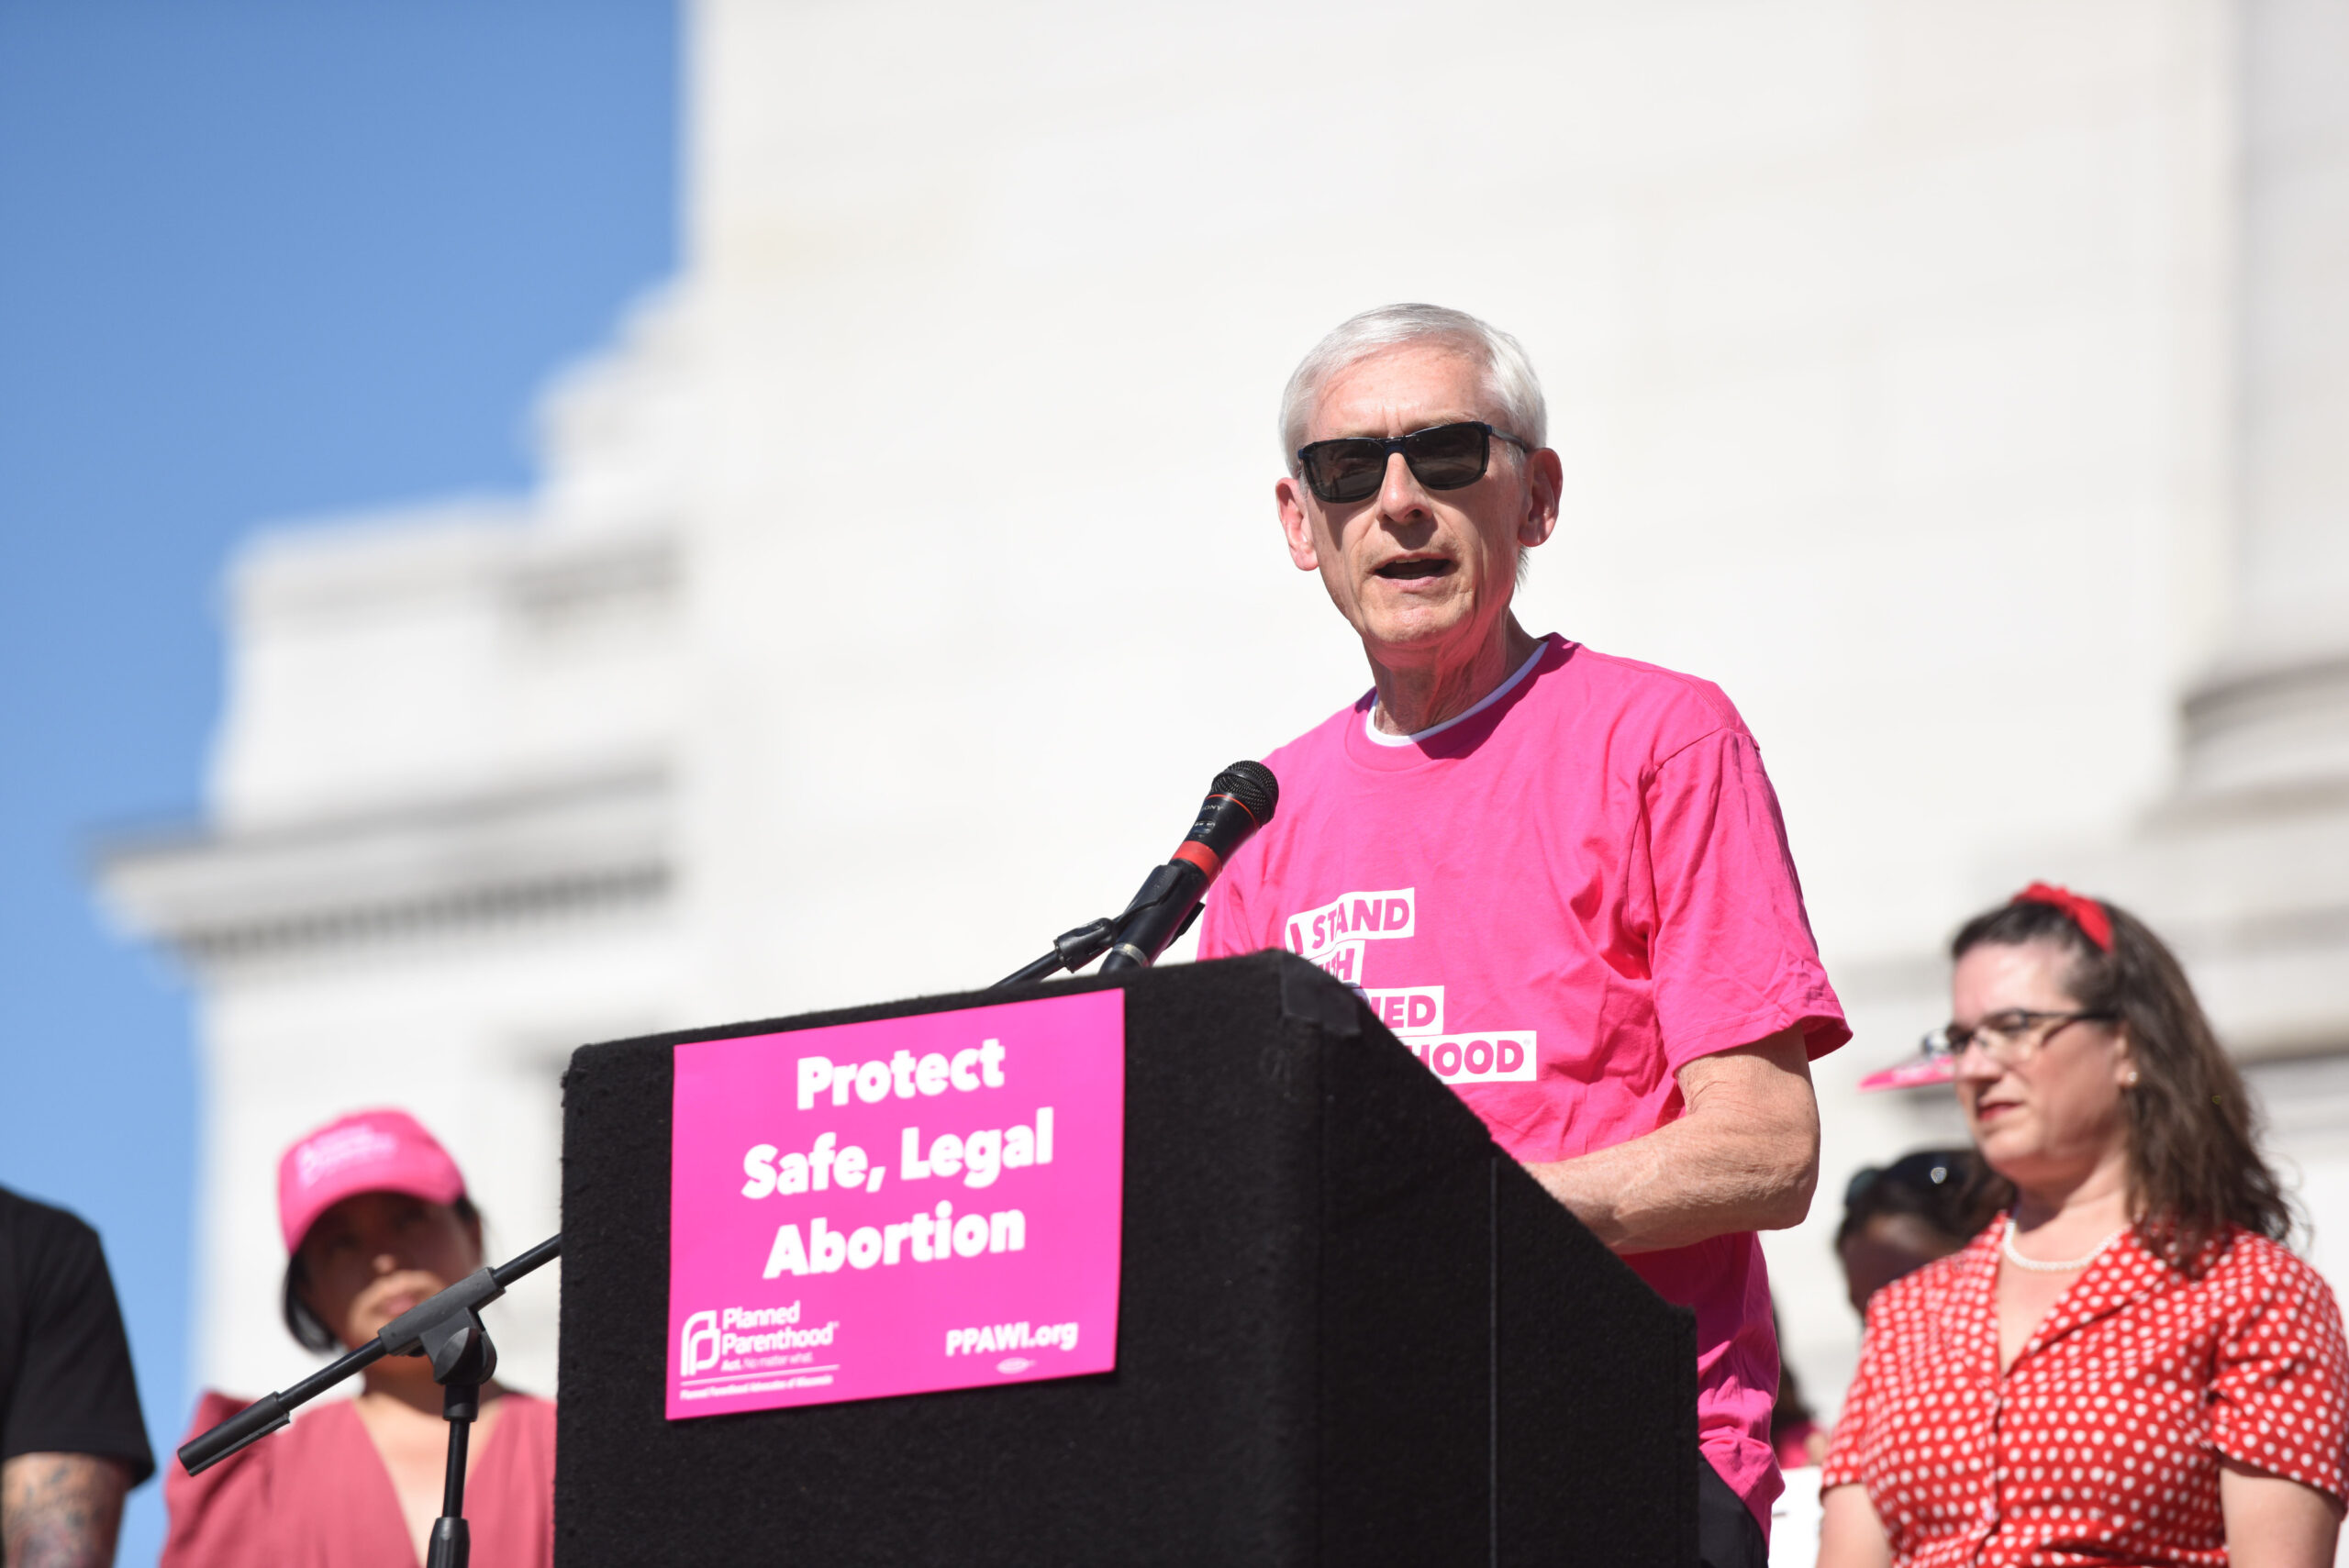 Gov. Tony Evers wears a pink Planned Parenthood shirt while speaking outside at a protest.